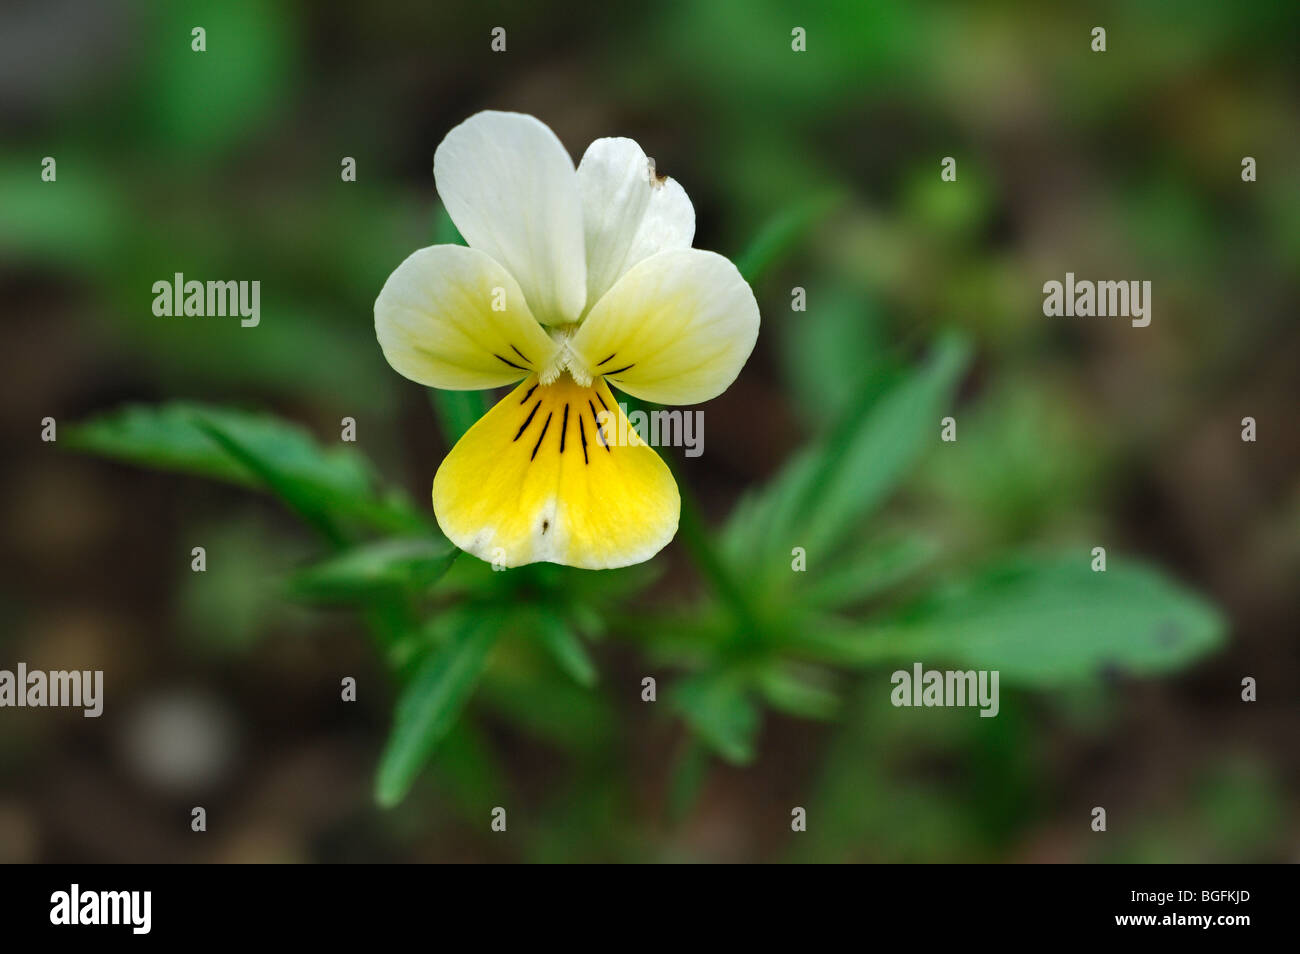 Wild pansy / heartsease / heart's ease (Viola tricolor) in flower in spring Stock Photo